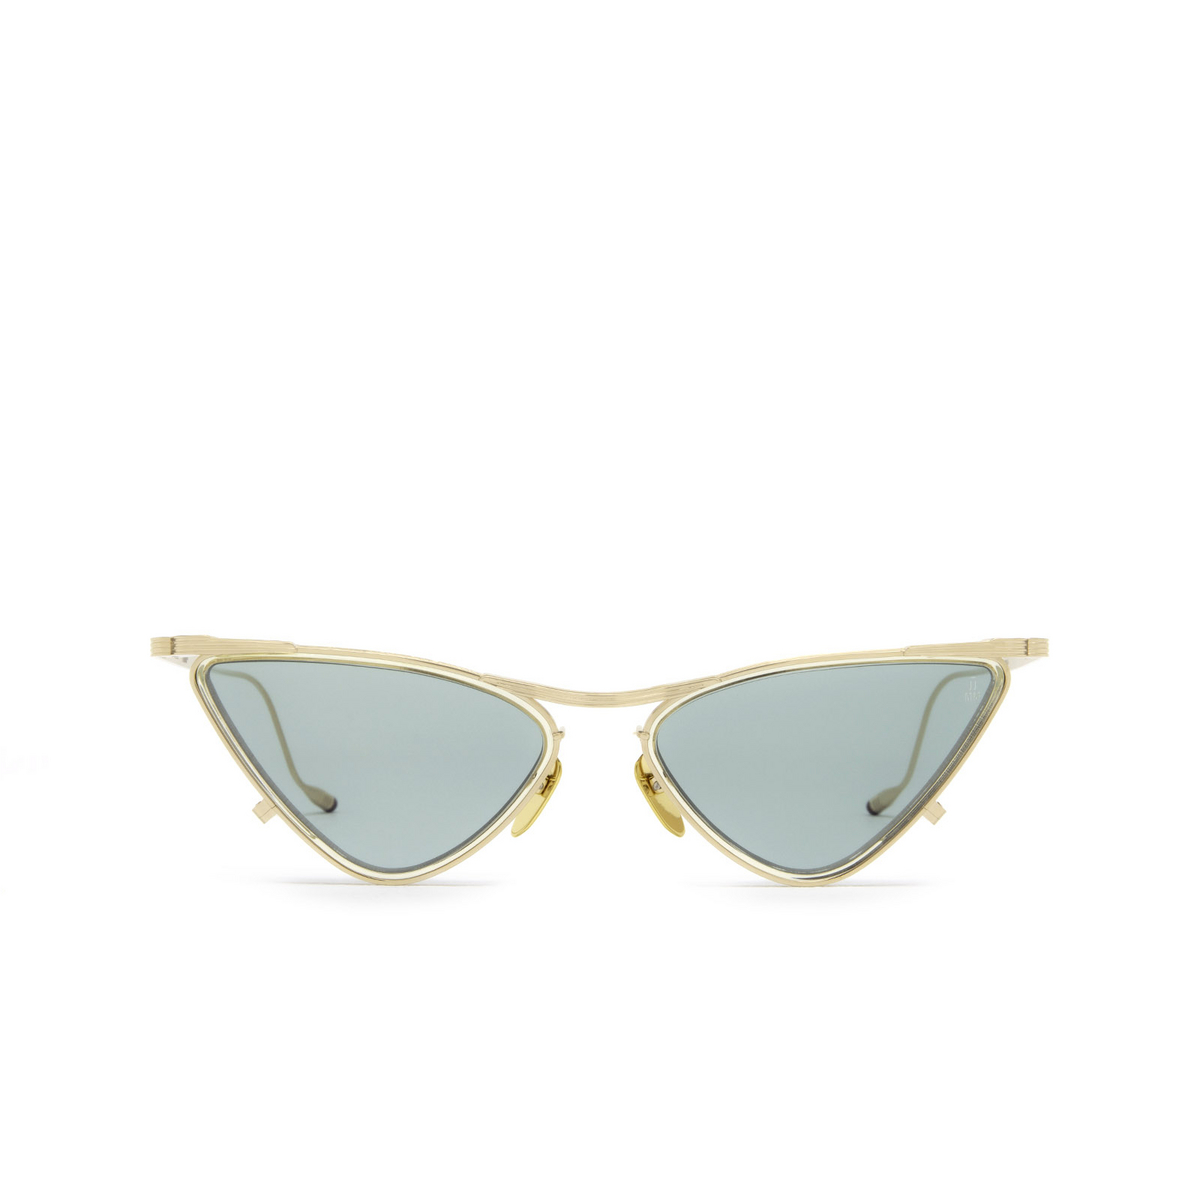 Jacques Marie Mage® Cat-eye Sunglasses: Niki color Altan - front view